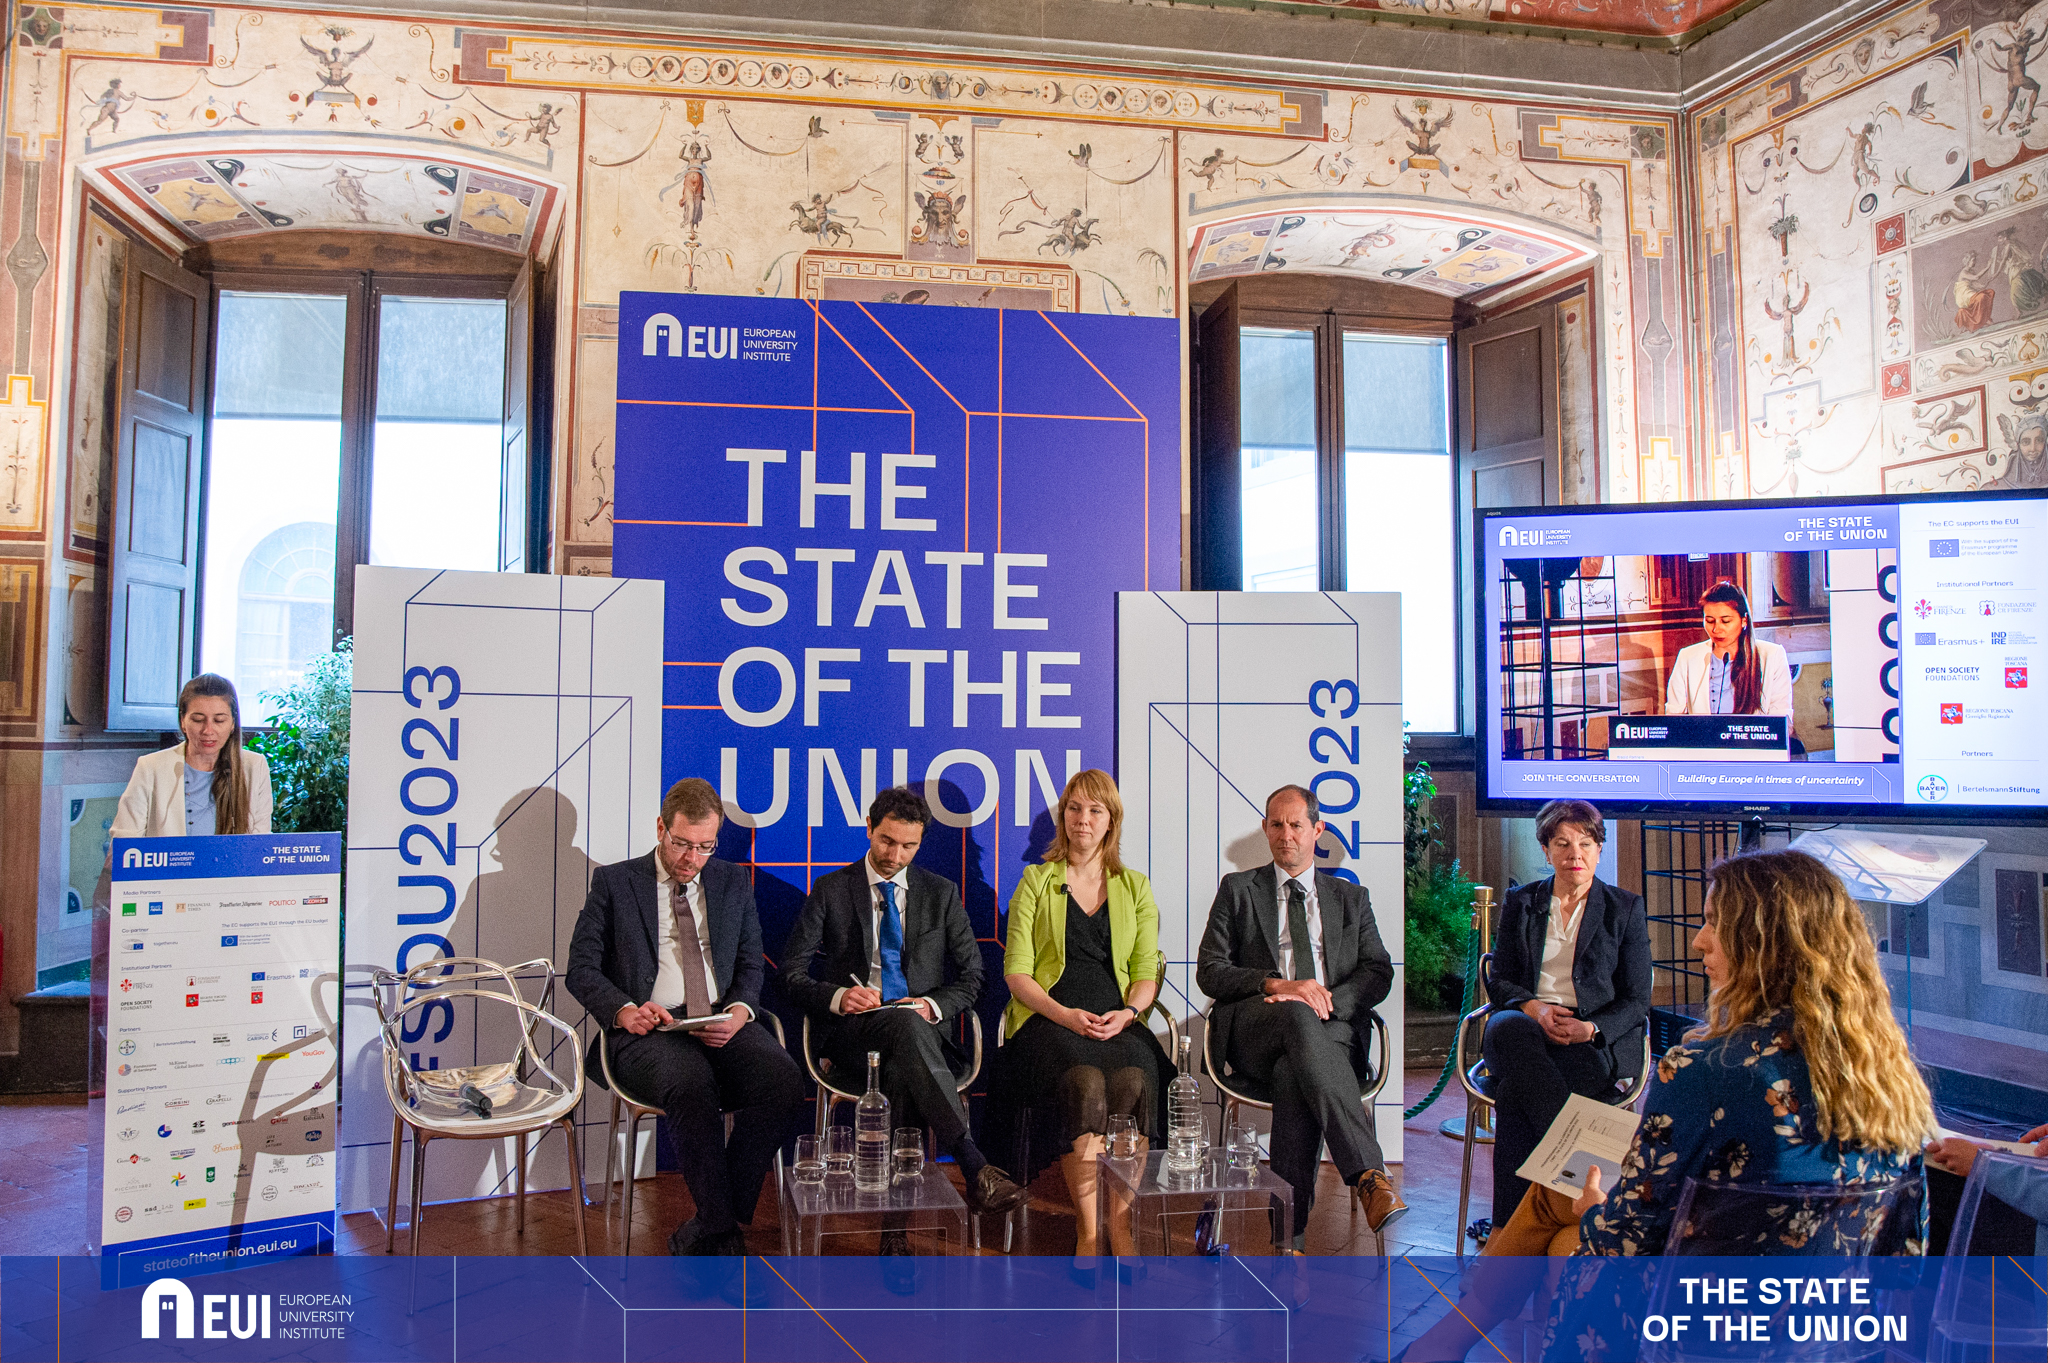 Speaker at podium and panellists sitting on chairs in front of banners with the name of the conference © EUI